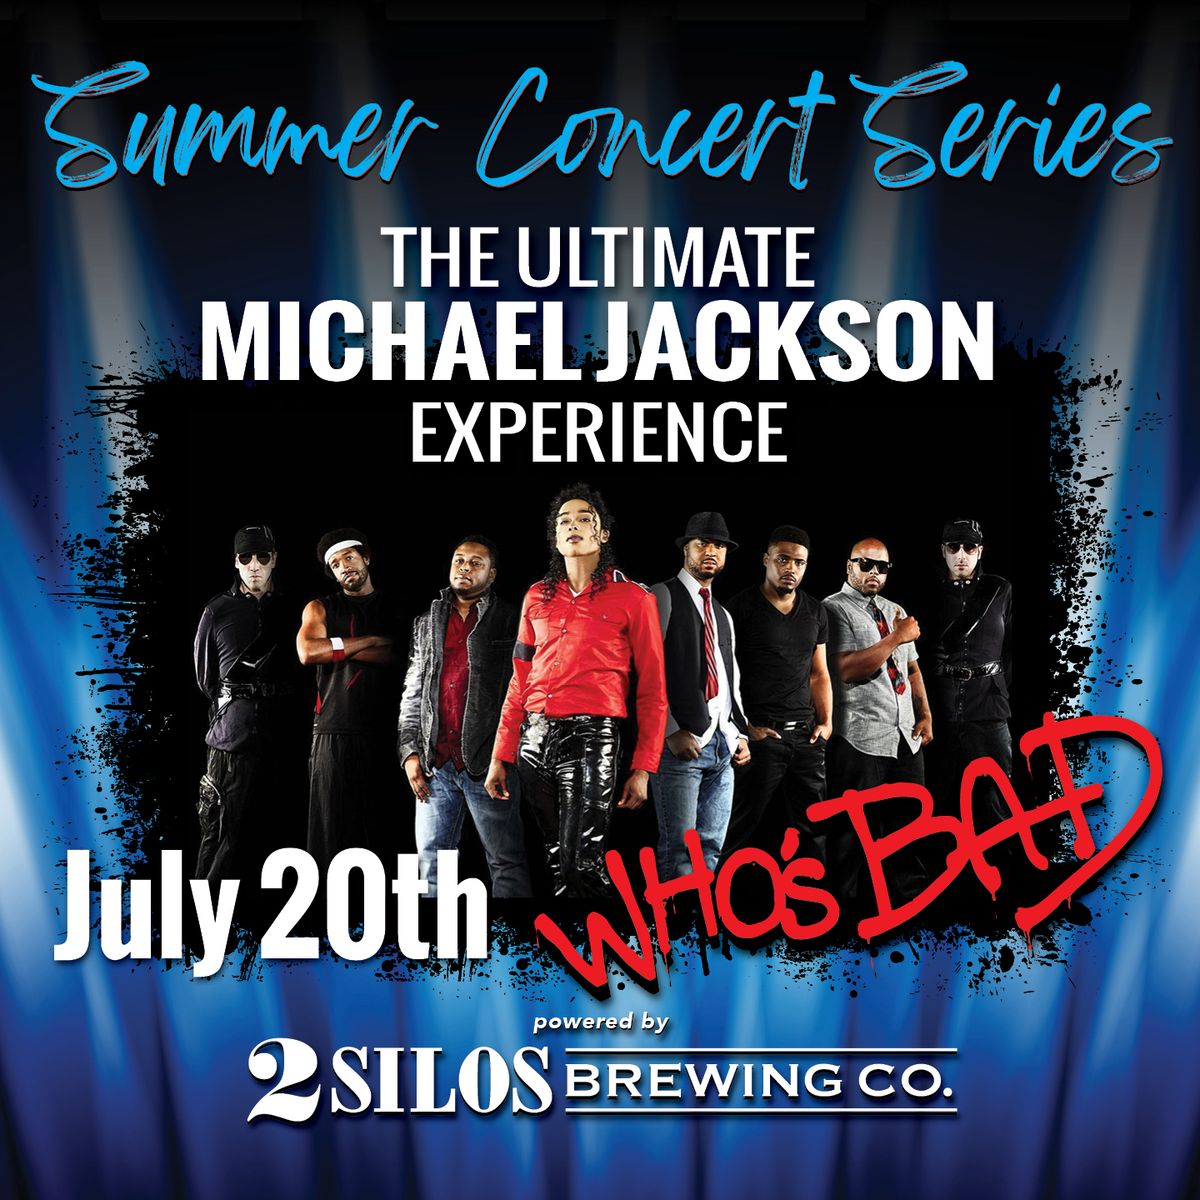 Summer Concert Series - Who's Bad: The Ultimate Michael Jackson Experience